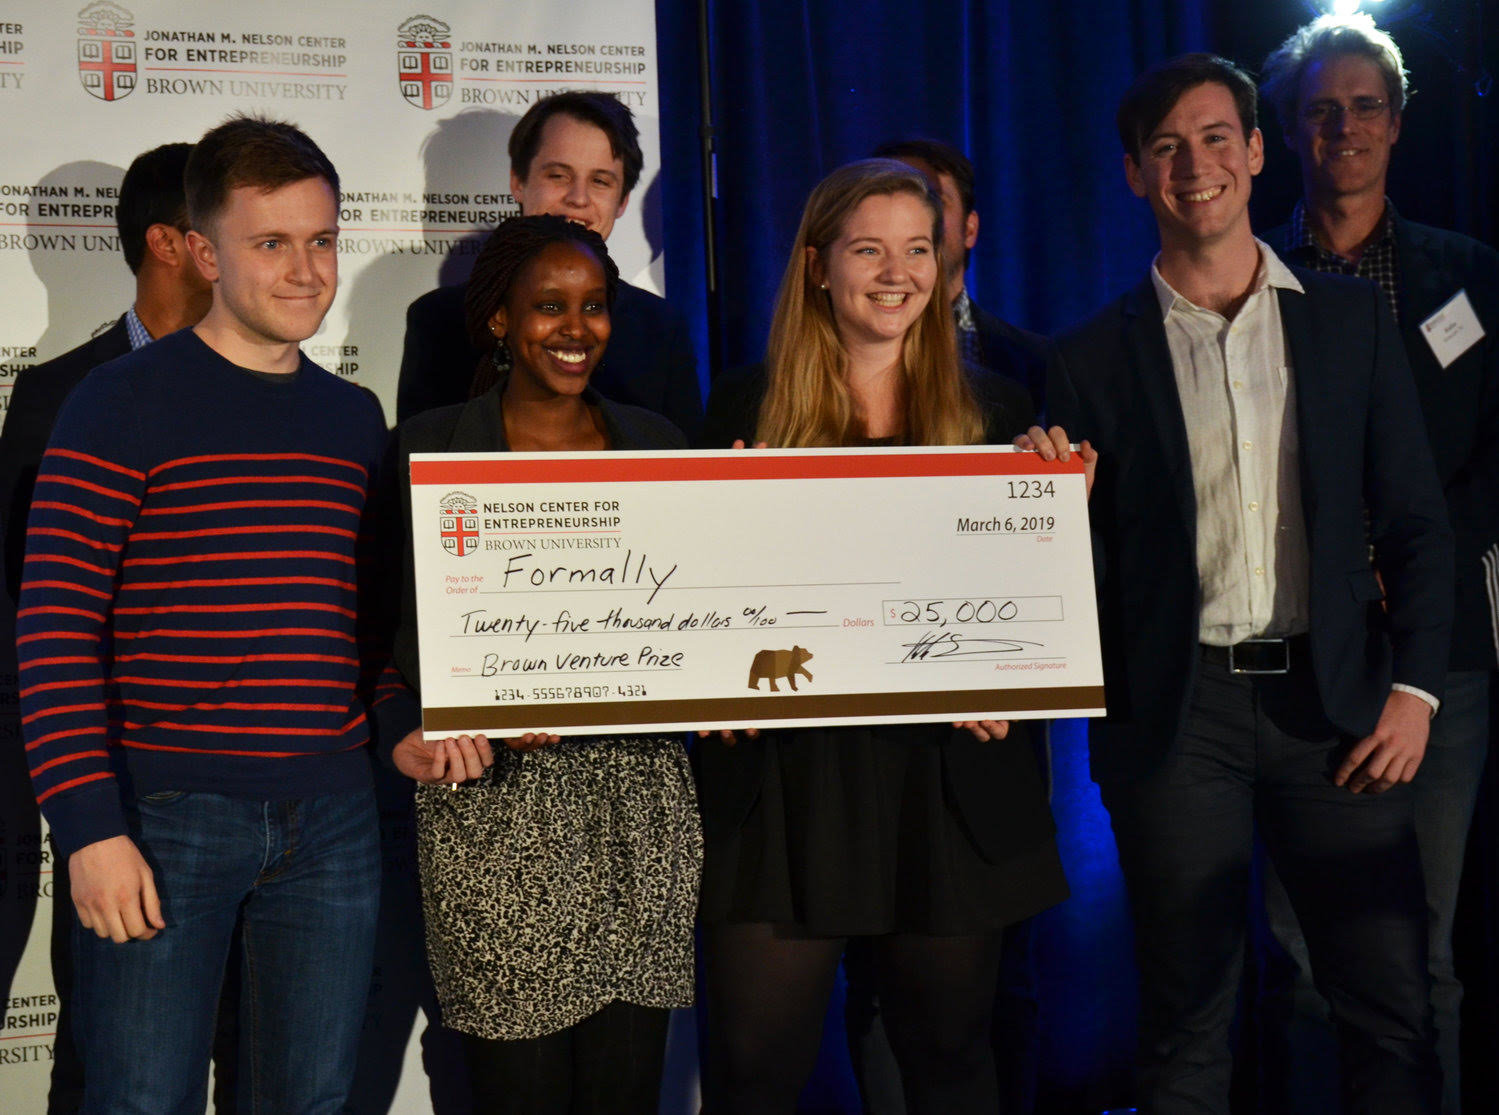 The winning team of Formally is awarded the 2019 Brown Venture Prize pitch night on March 6, 2019.